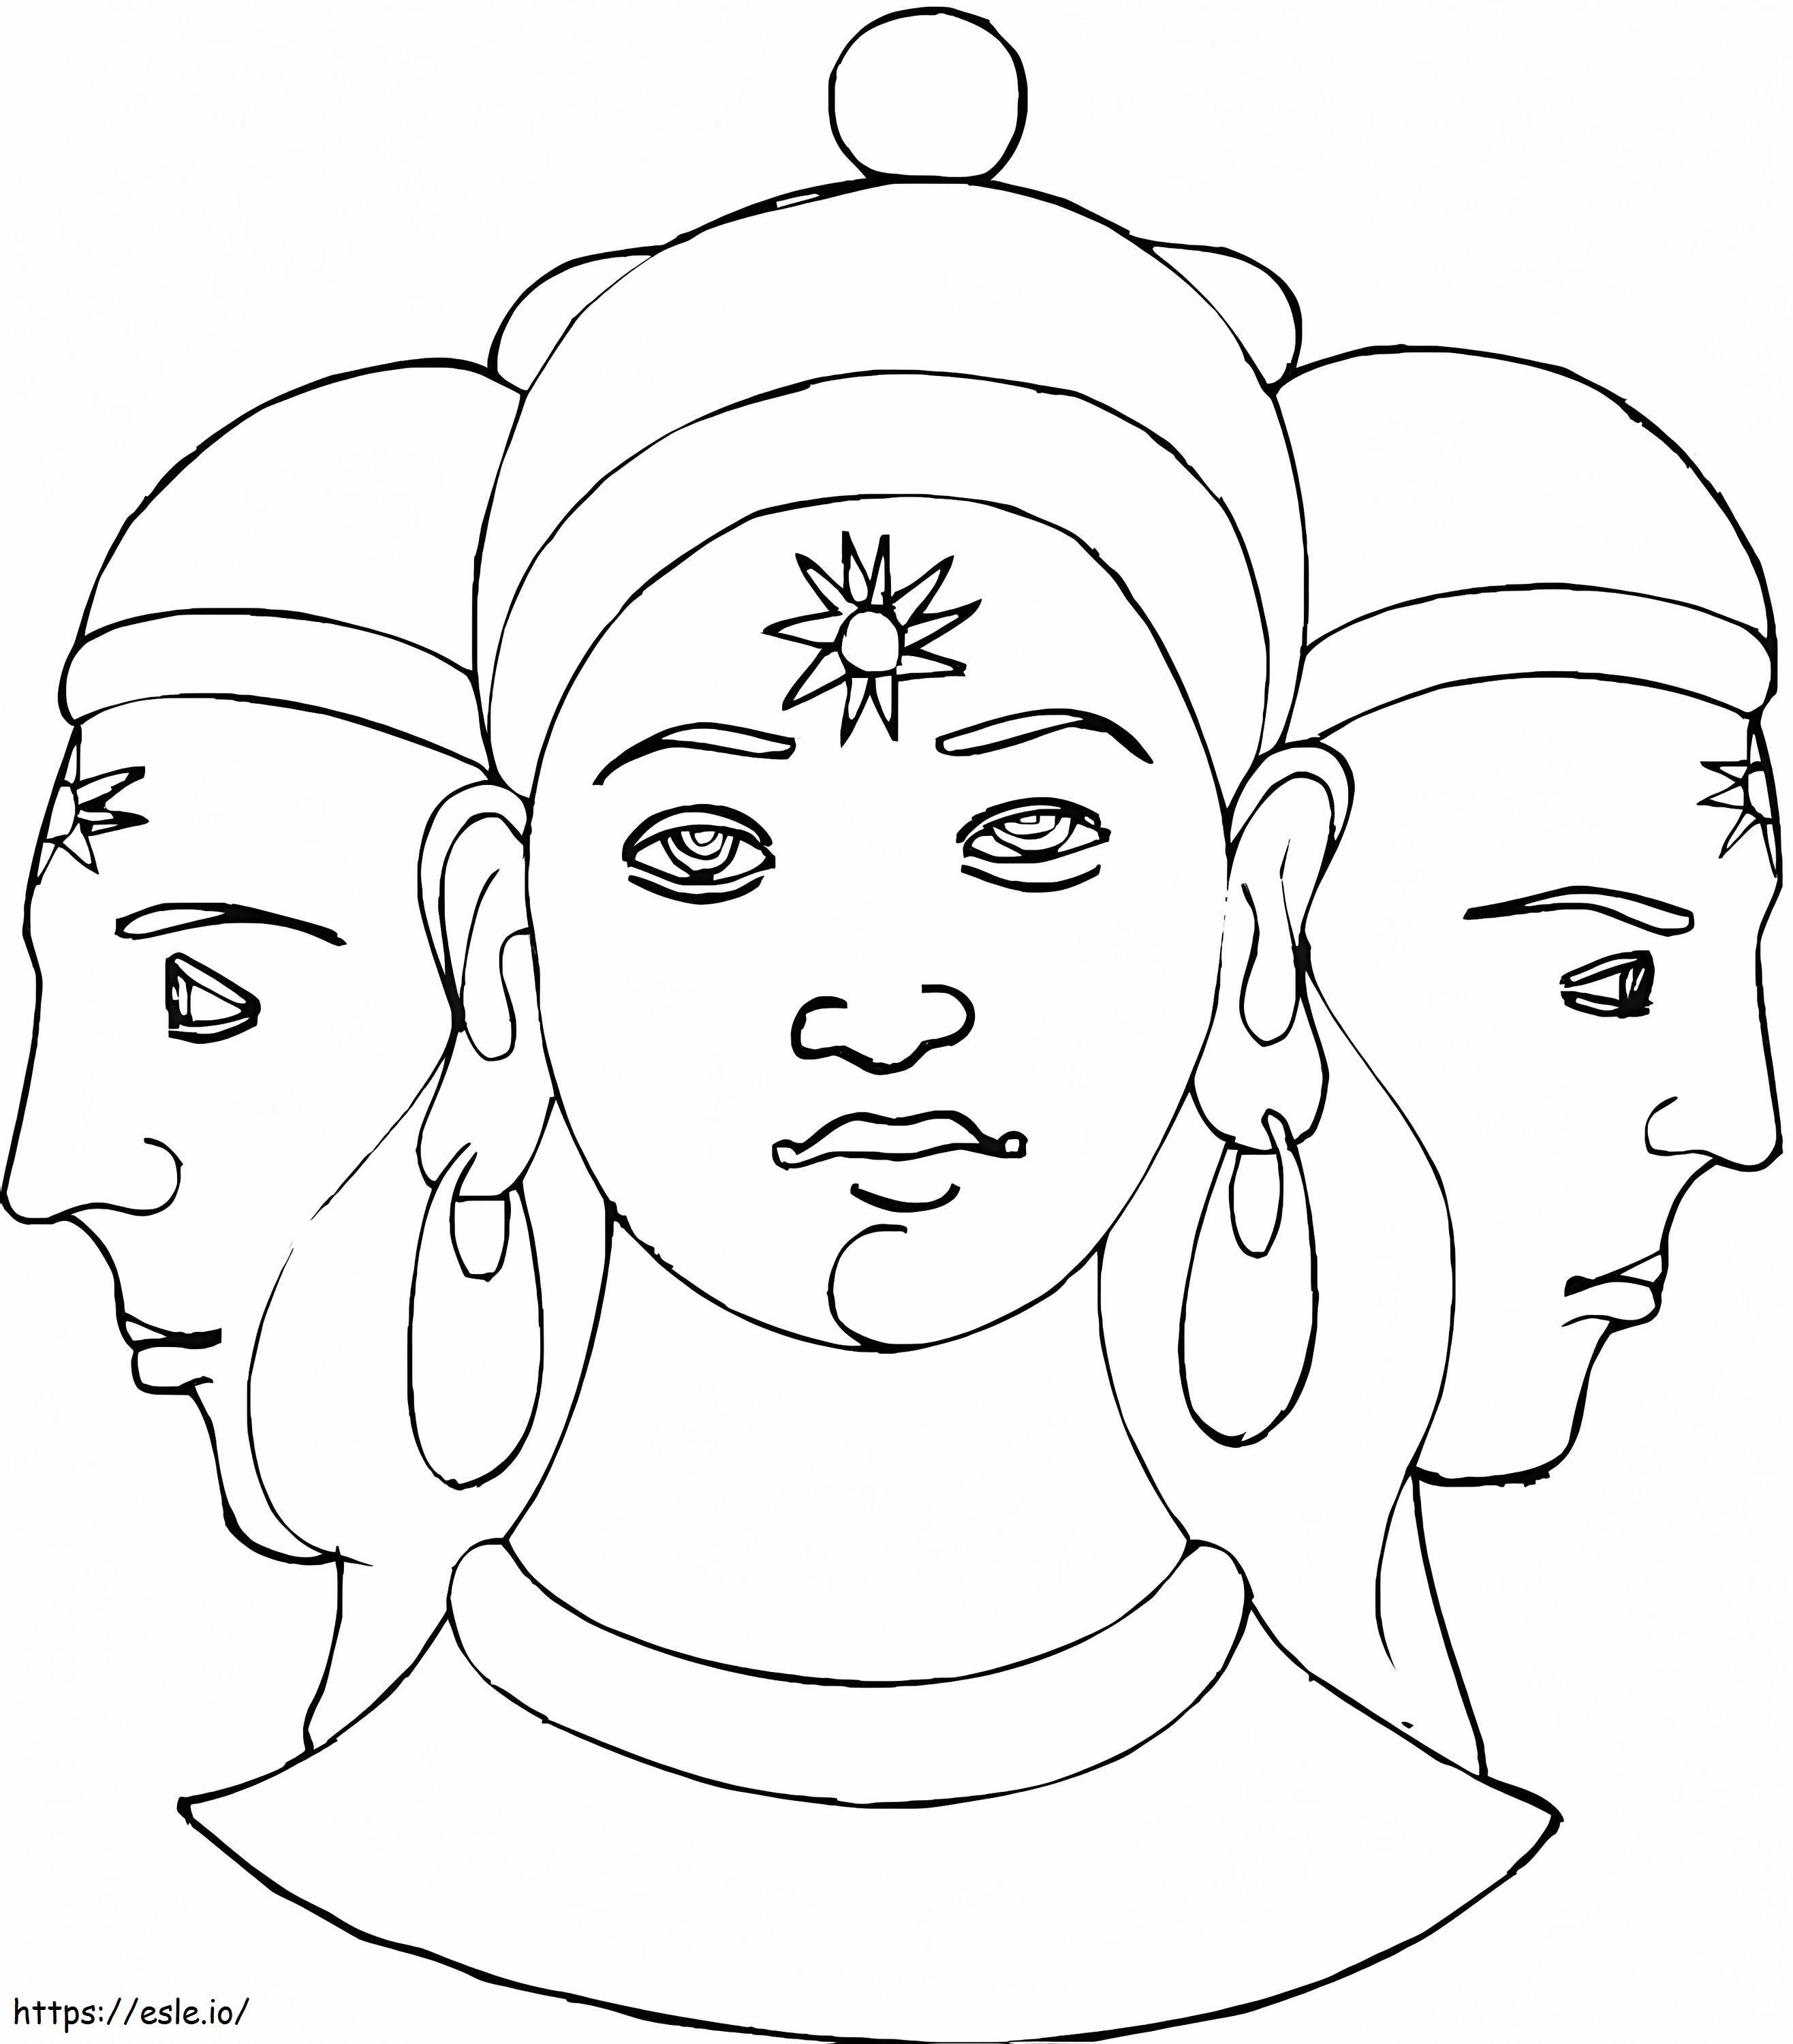 Shiva coloring page